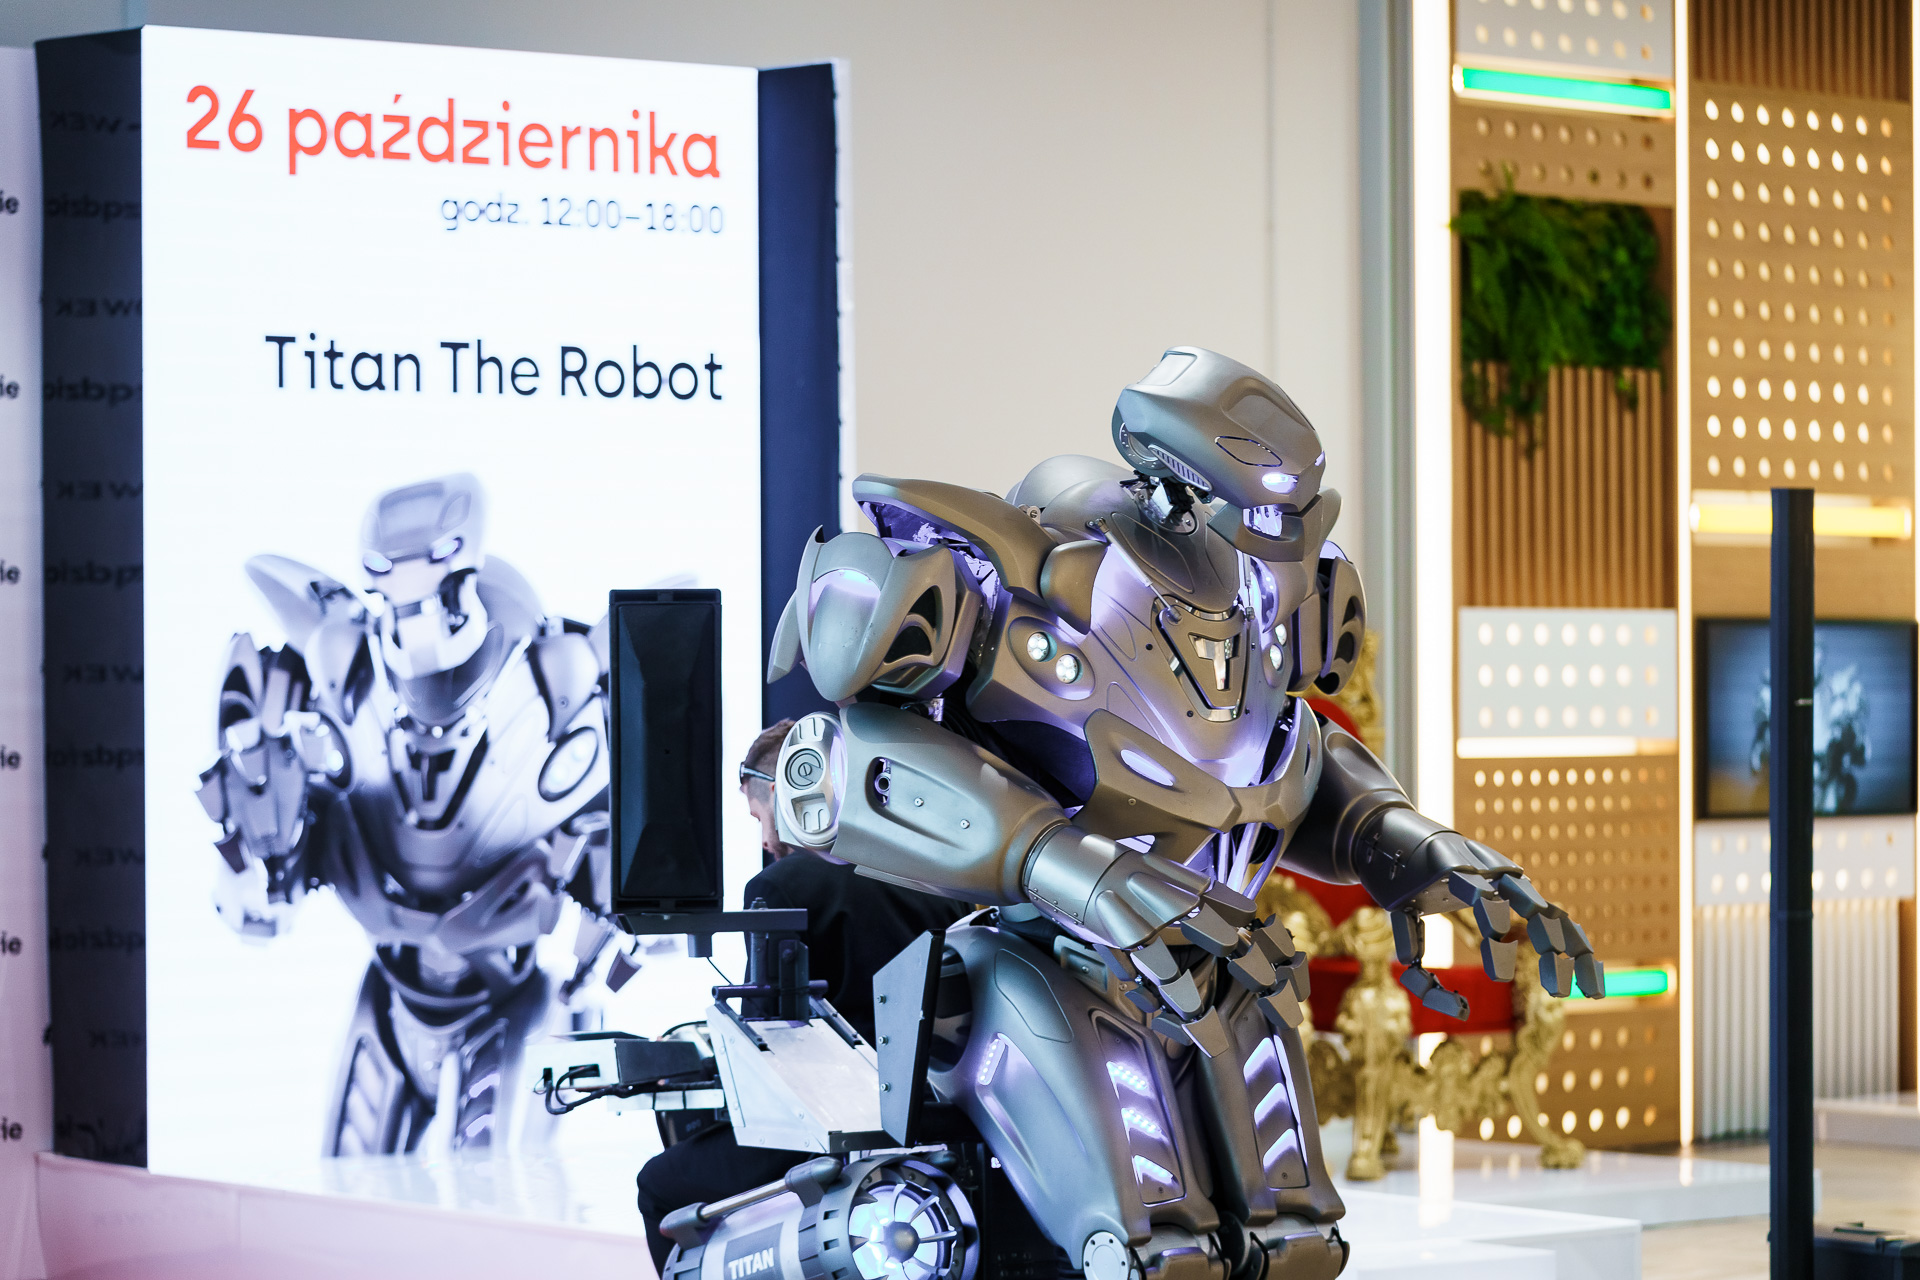 Titan the Robot at a corporate event at a shopping centre in Warsaw, Poland